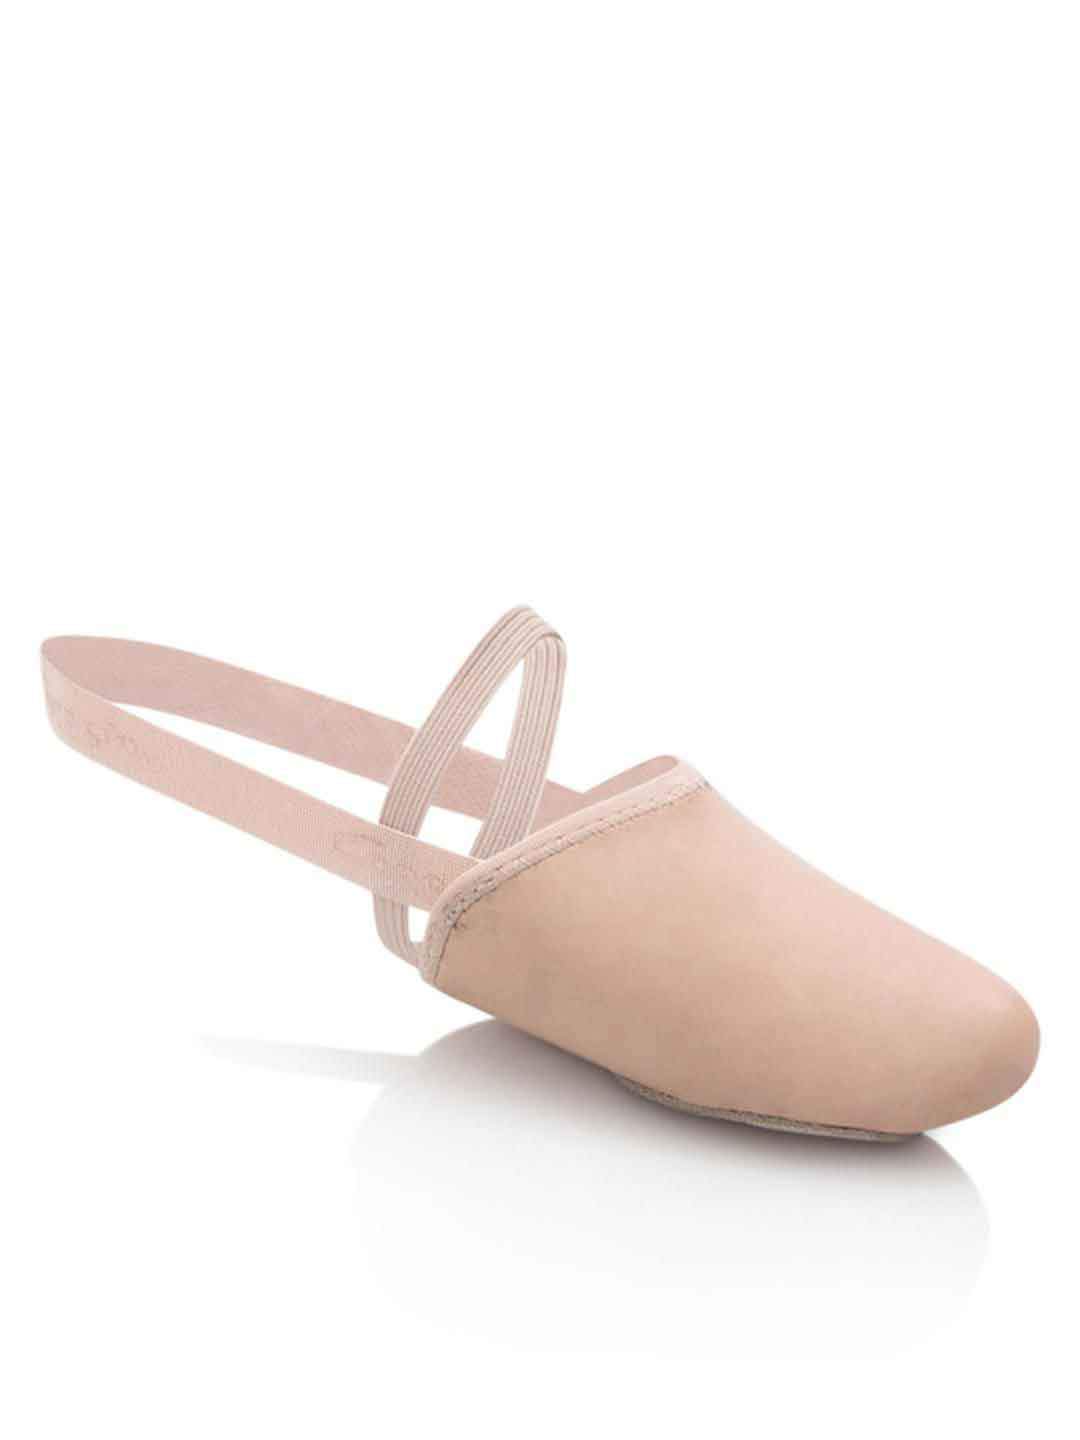 Pirouette II Leather Adult Lyrical Shoe Lyrical Shoes Capezio 